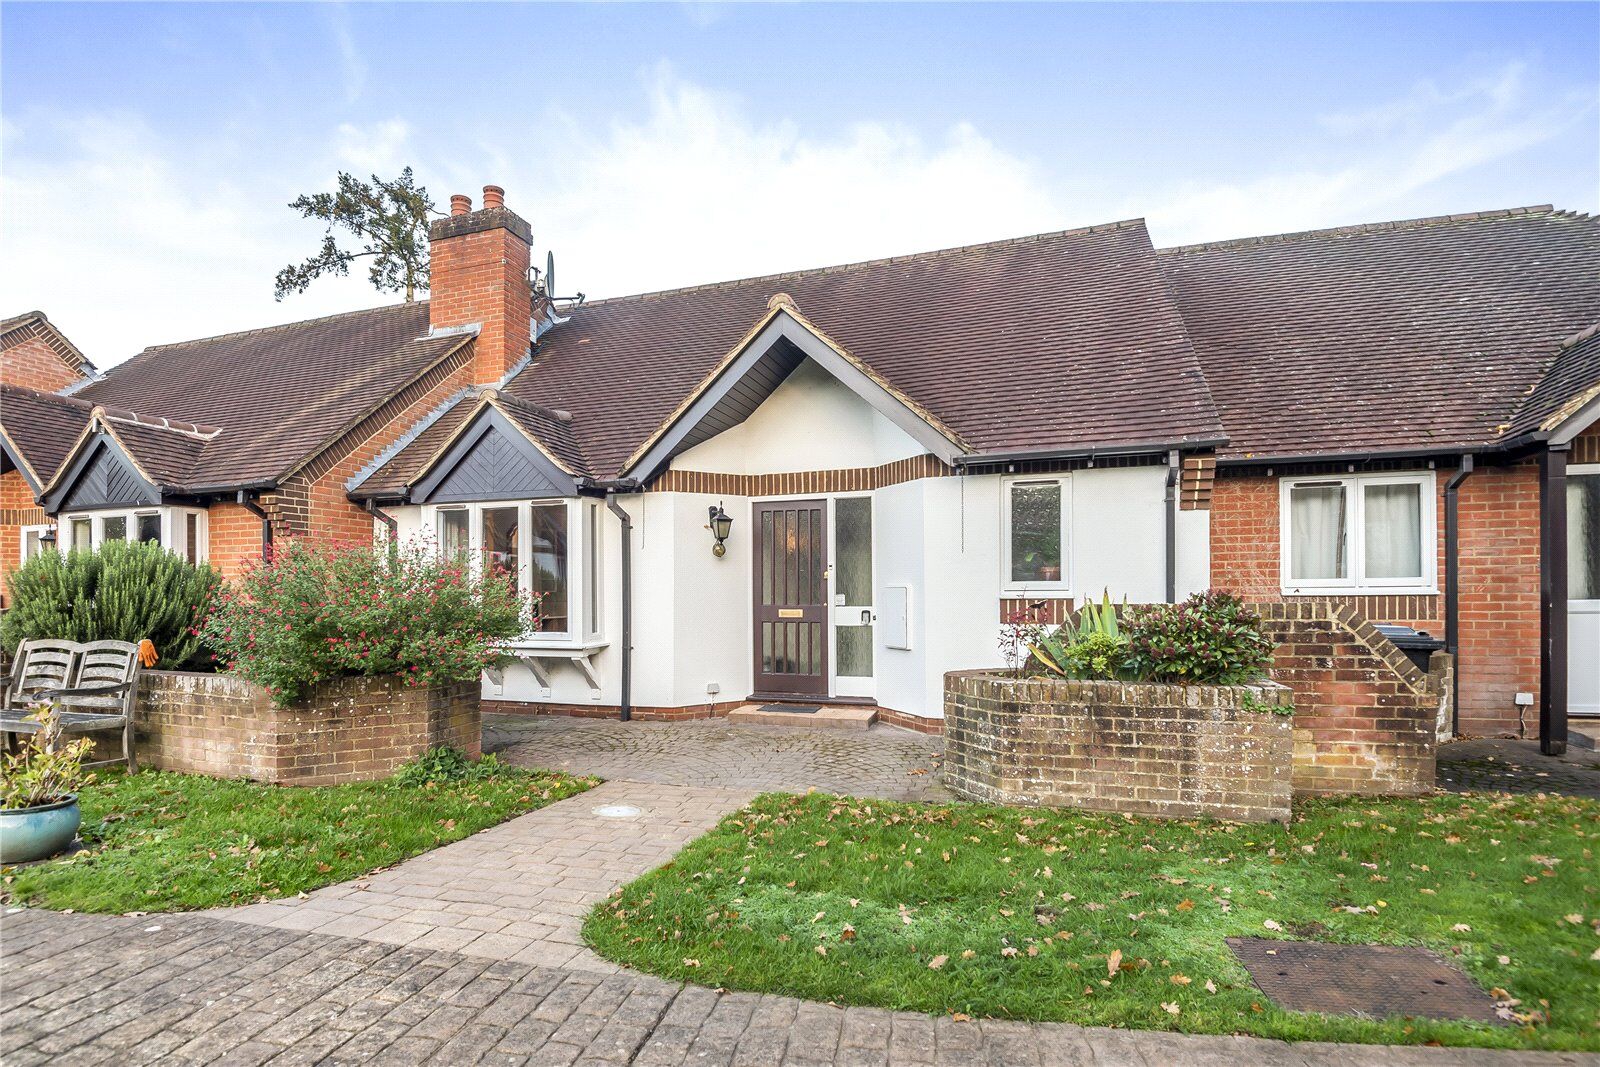 2 bedroom mid terraced bungalow for sale War Memorial Place, Henley-On-Thames, RG9, main image